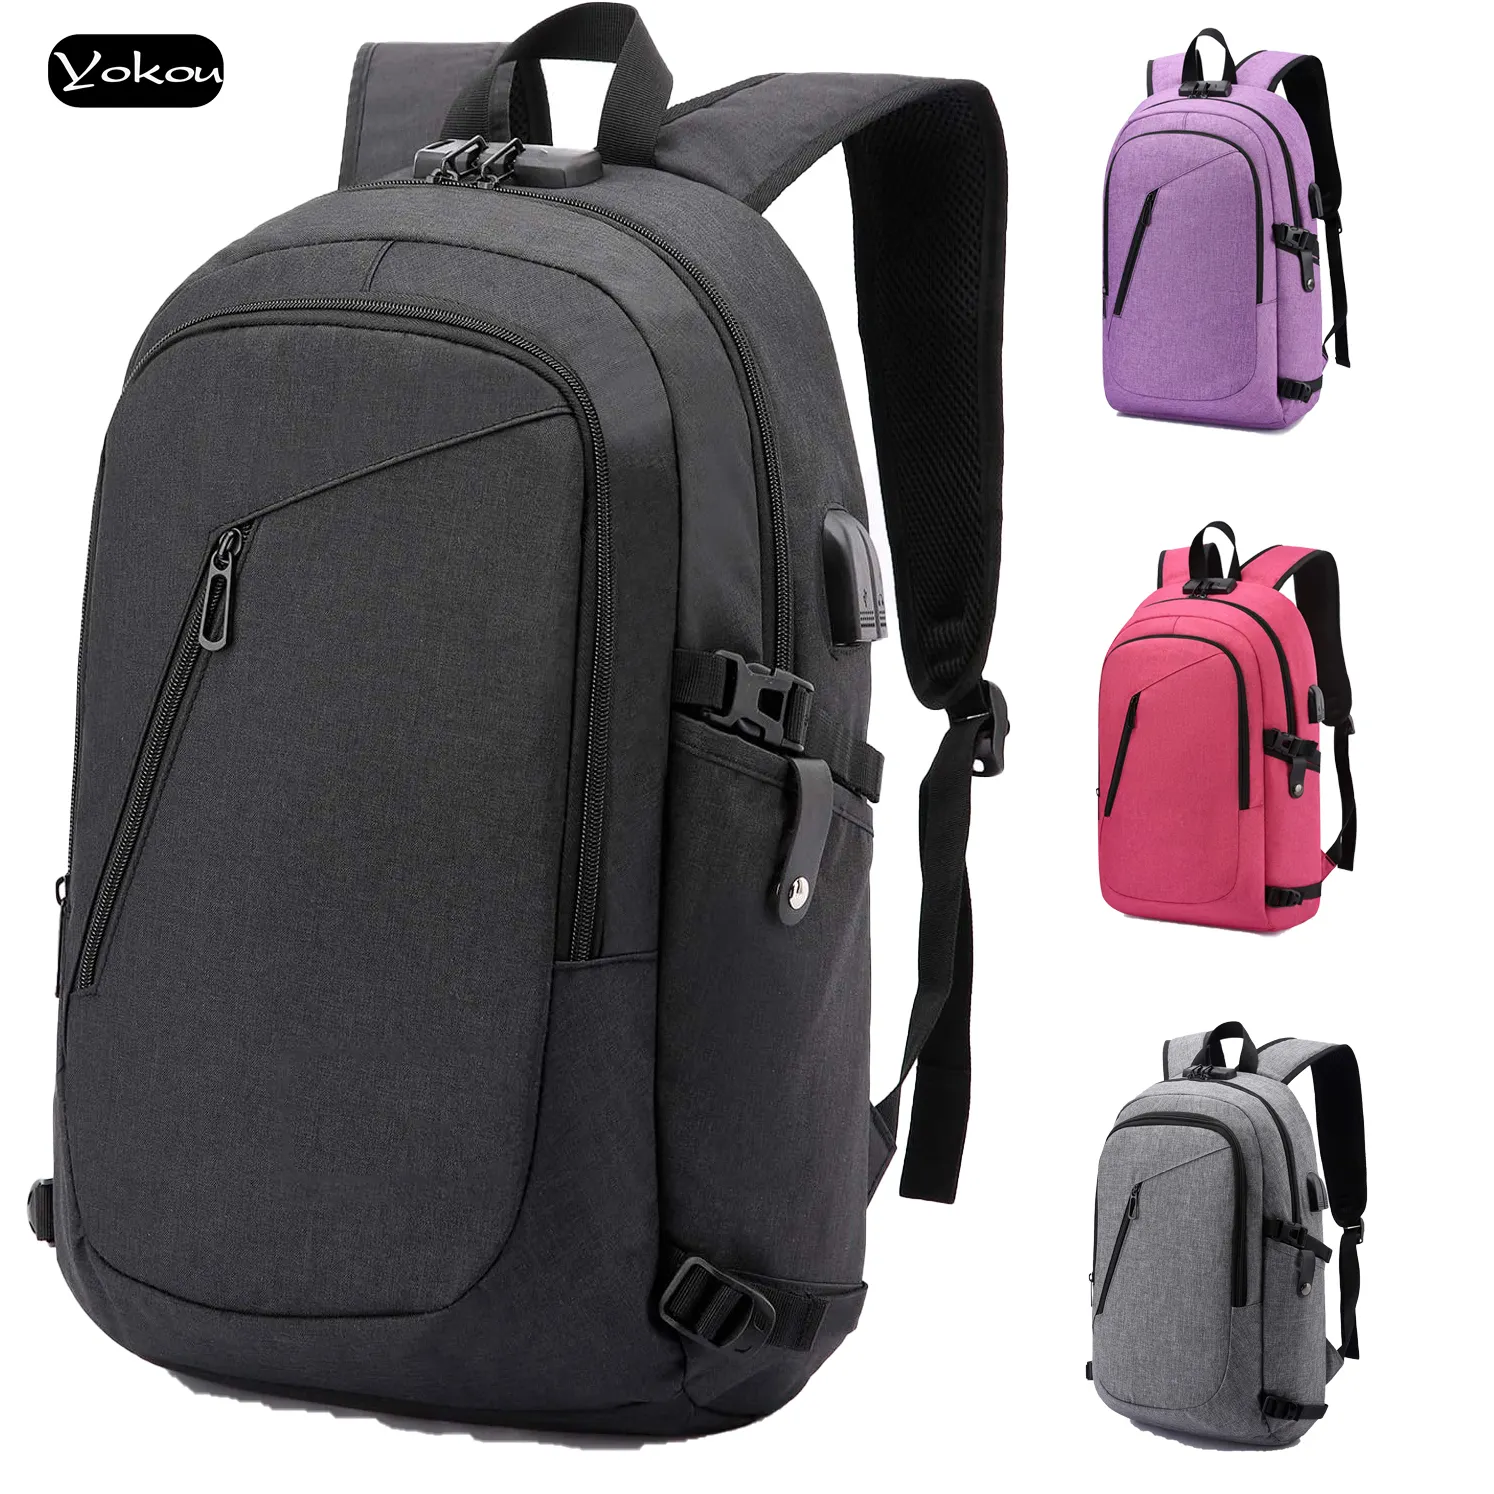 Private Slim Waterproof Business Travel Gift College School Bookbag Computer Bag Anti Theft Backpack With Usb Charging Port